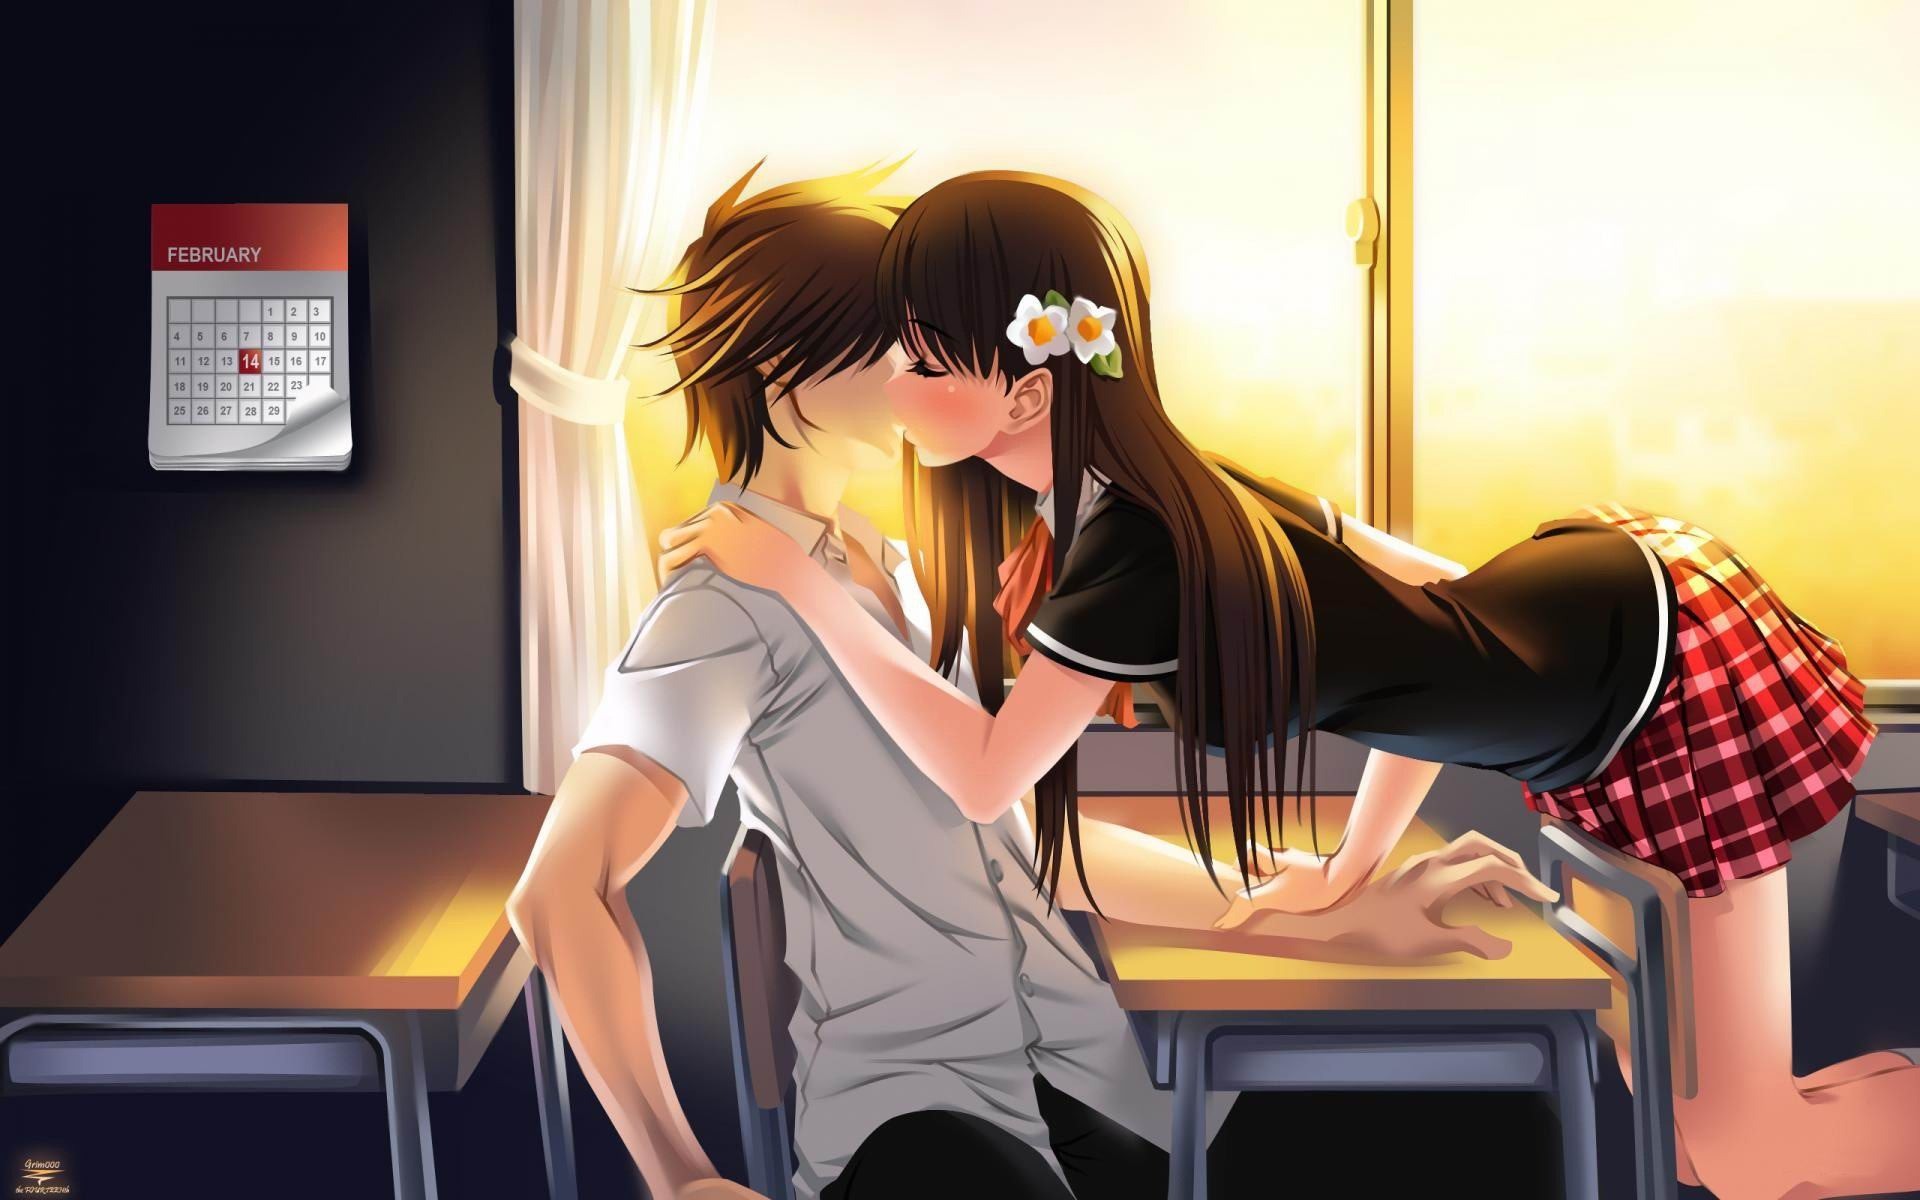 1920x1200  Cute anime couples wallpapers Gallery Â· Download Â· cute ...